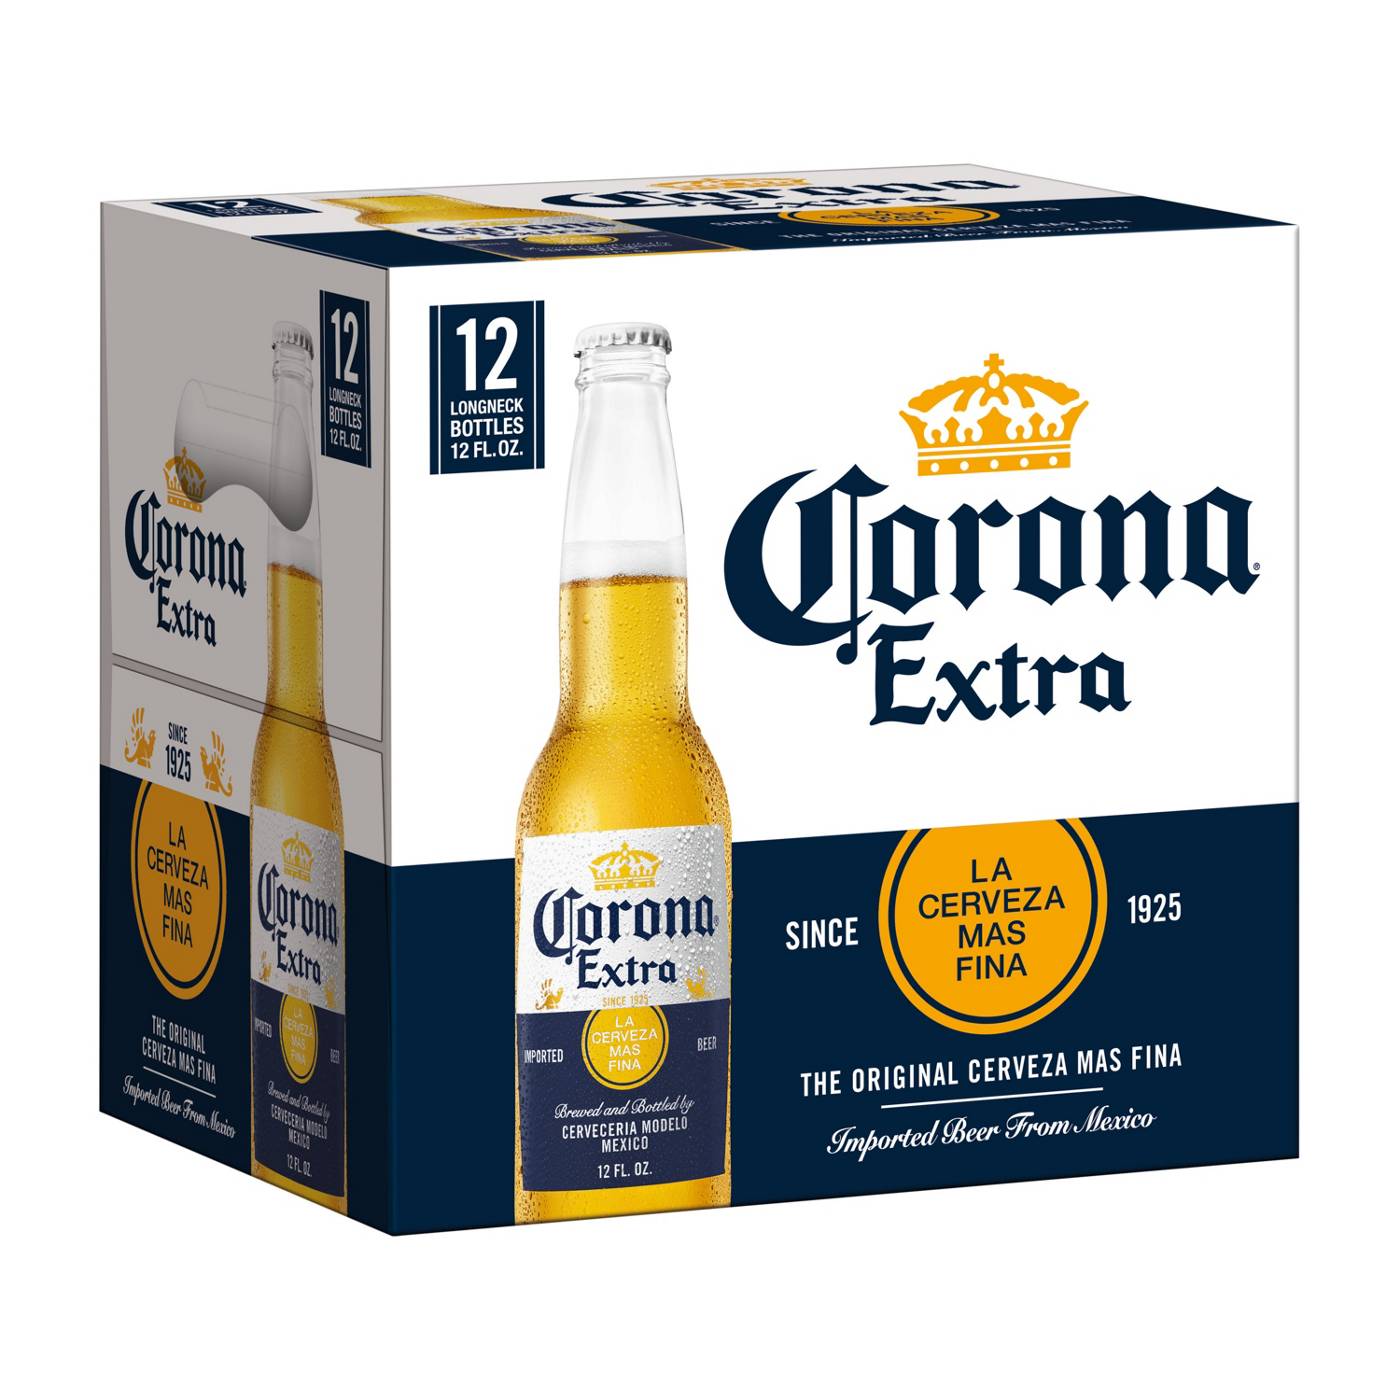 Corona Extra Mexican Lager Import Beer 12 oz Bottles, 12 pk; image 1 of 10